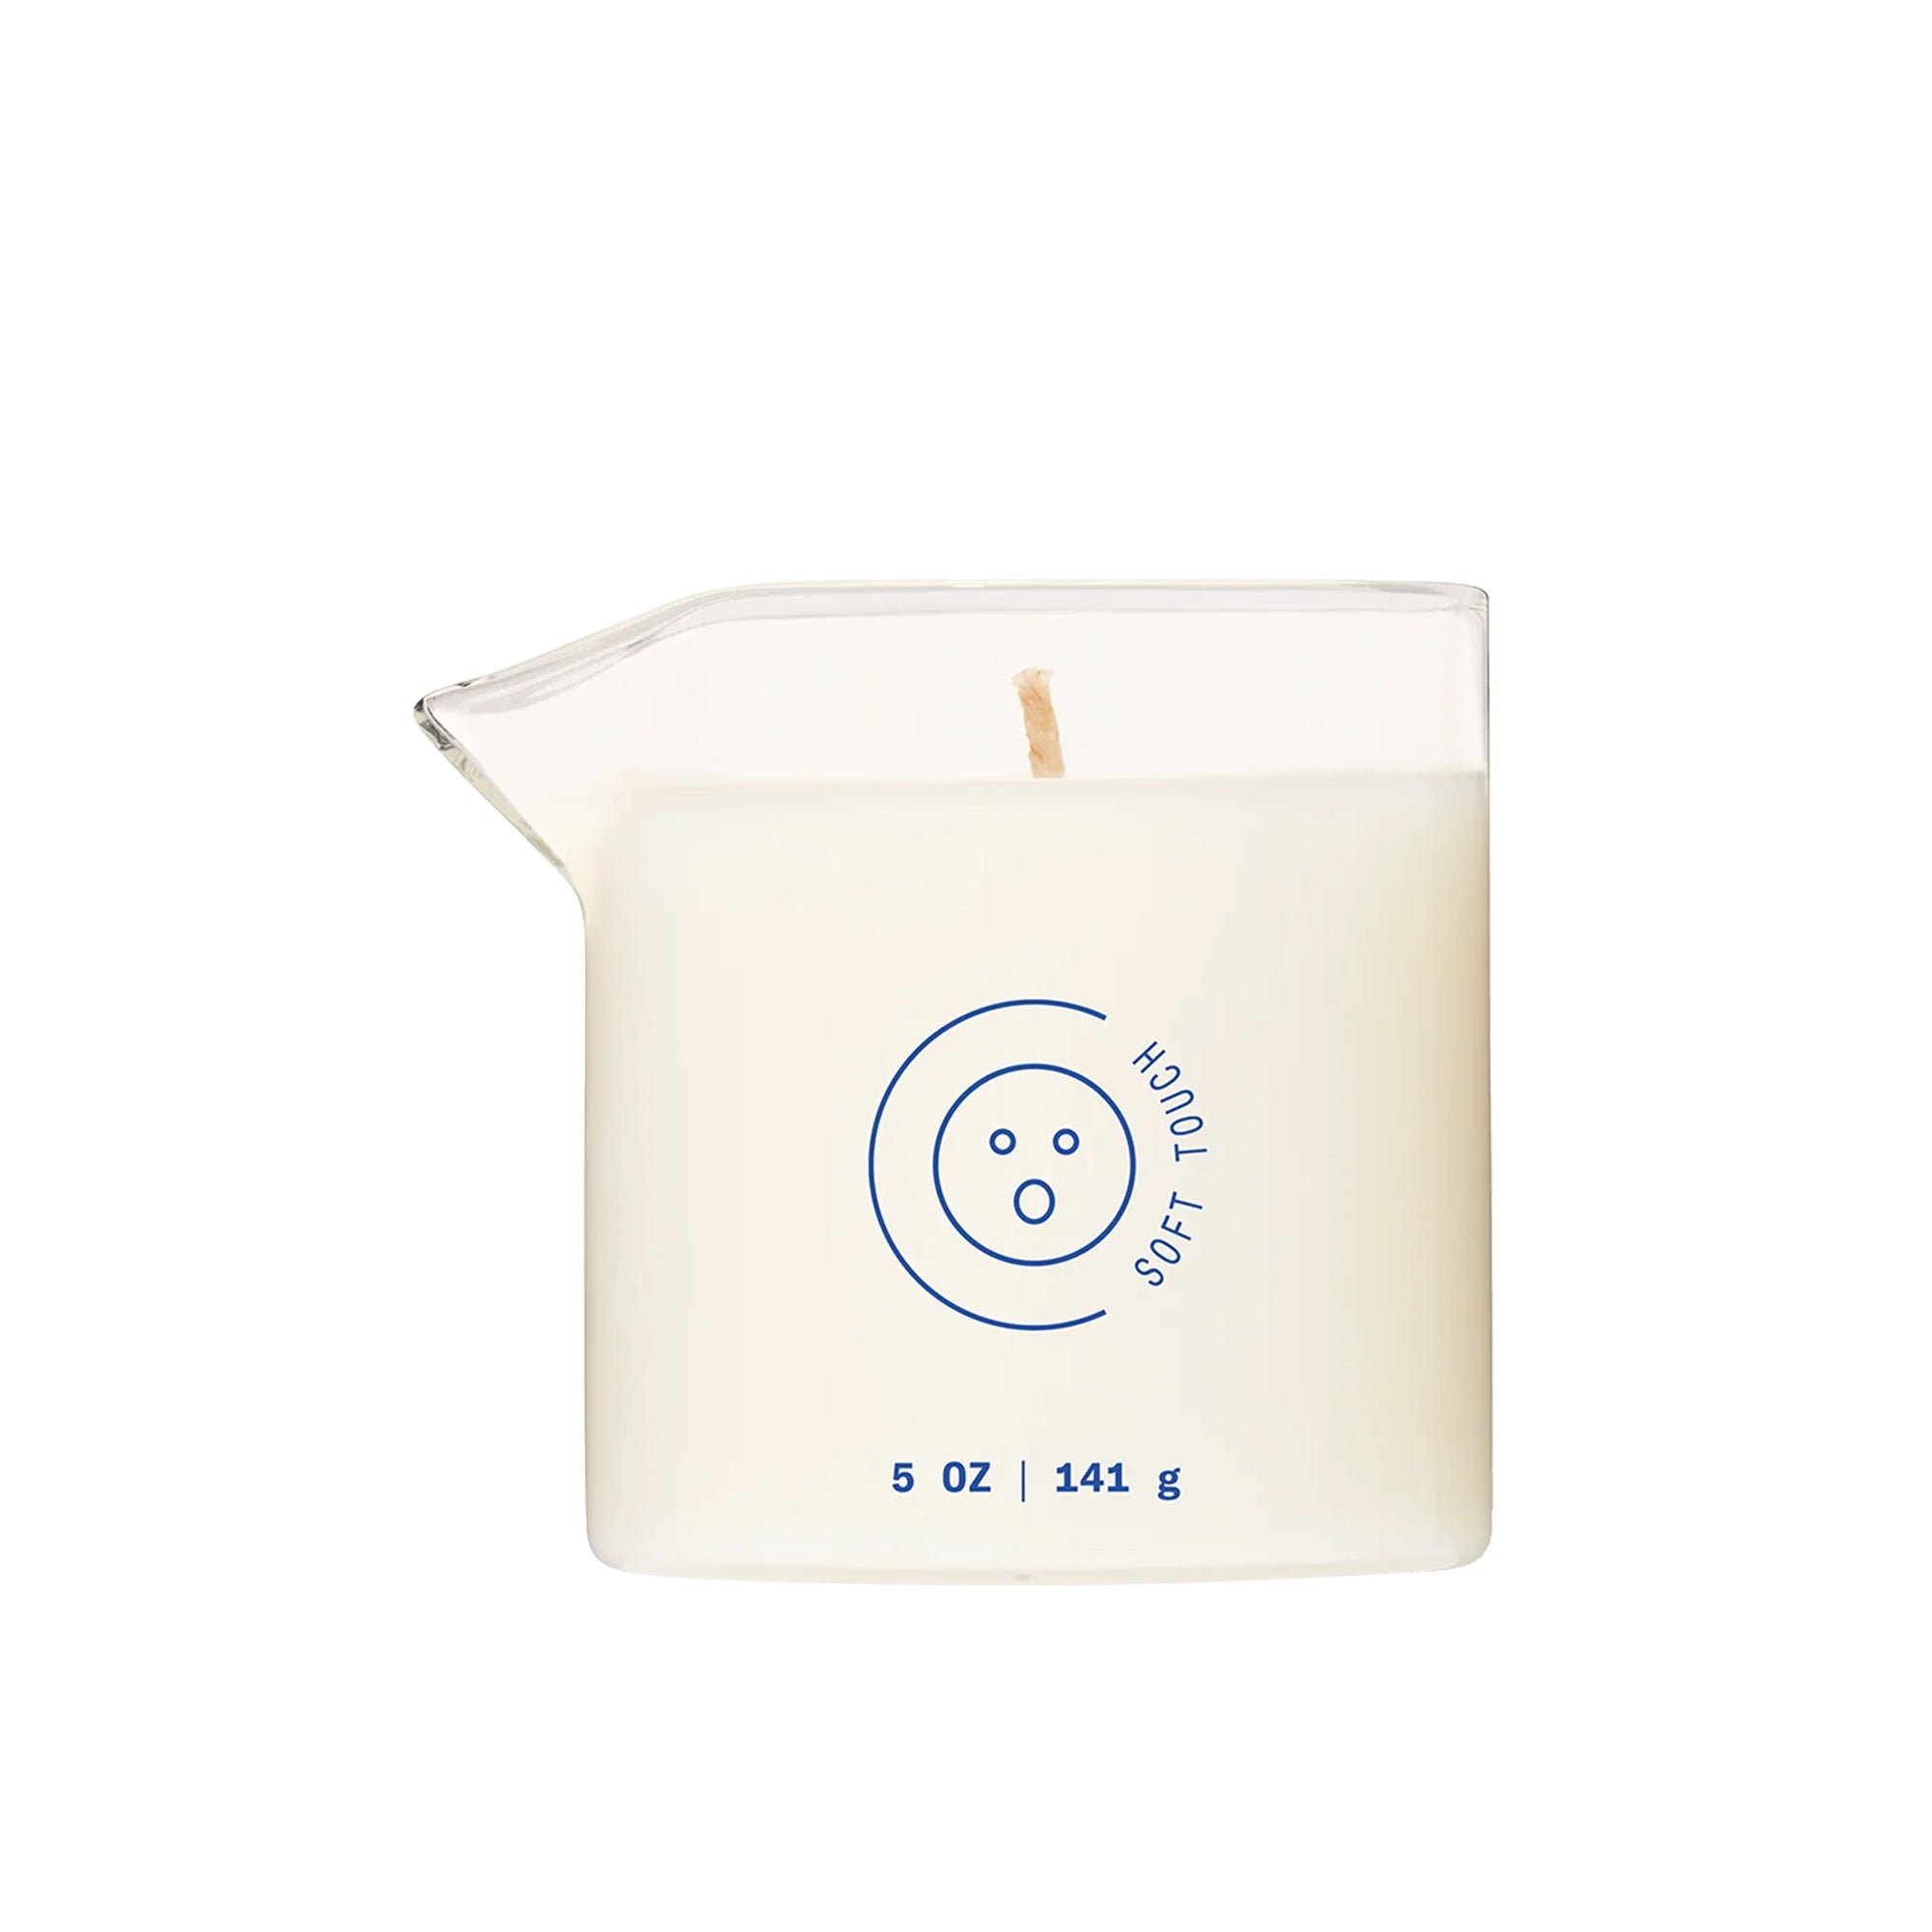 Massage Oil Candle Soft Touch